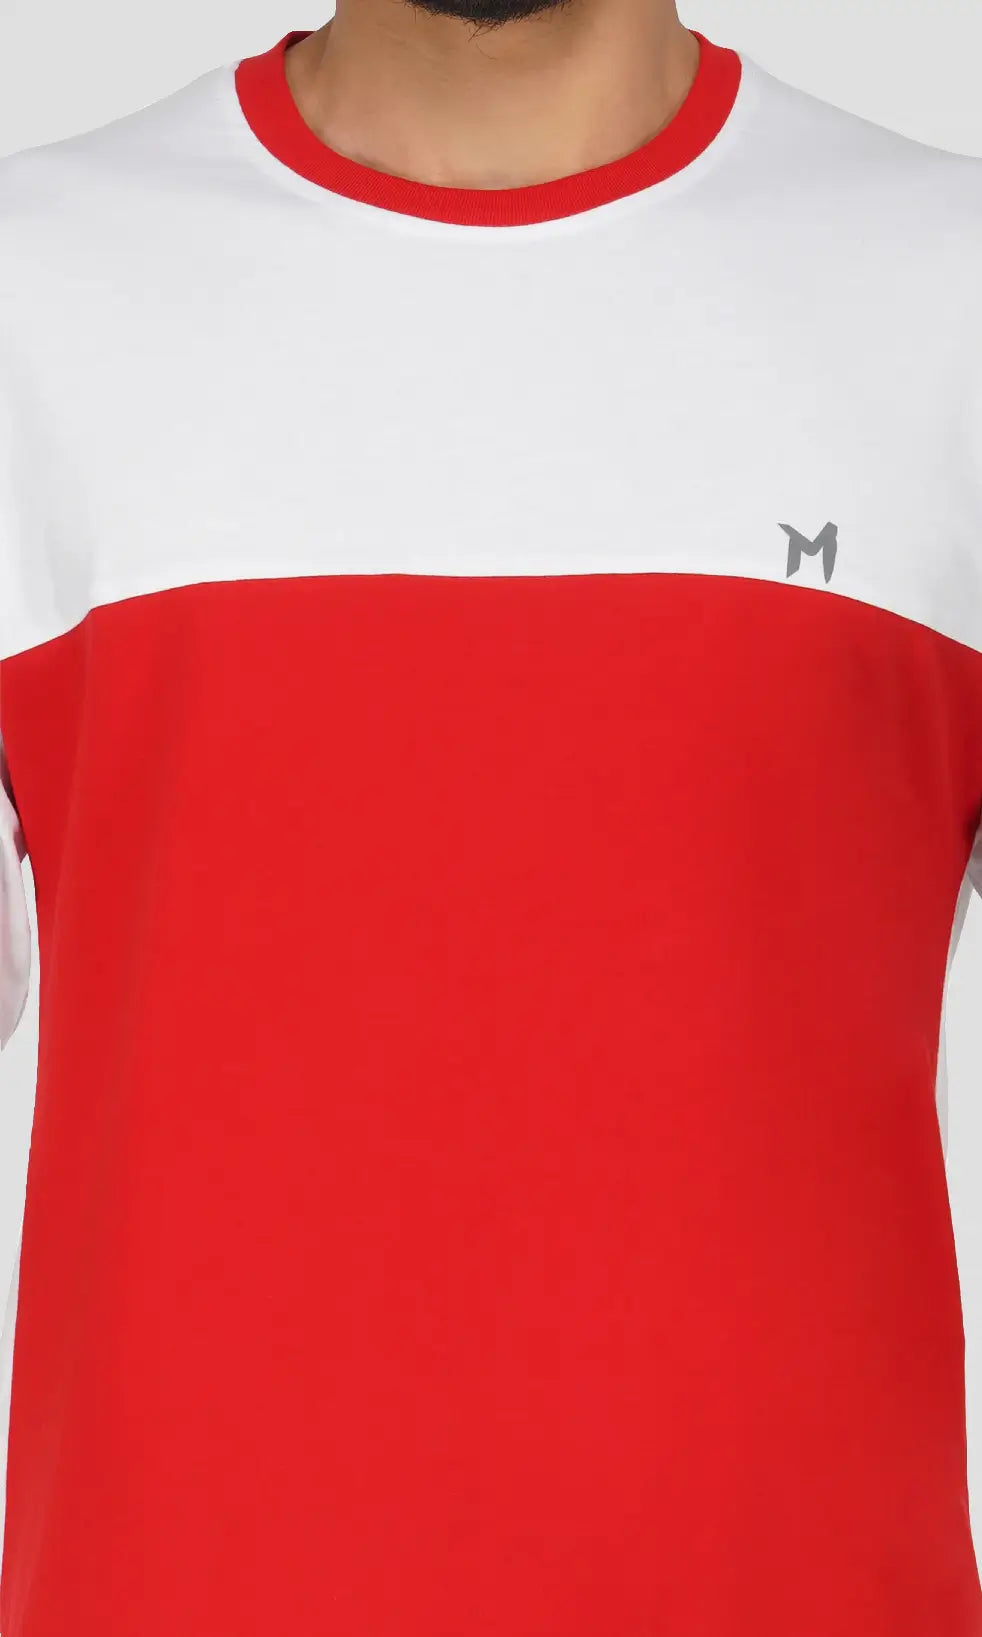 Mebadass Men's ColorBlocked OverSized Cotton T-shirts - White & Red